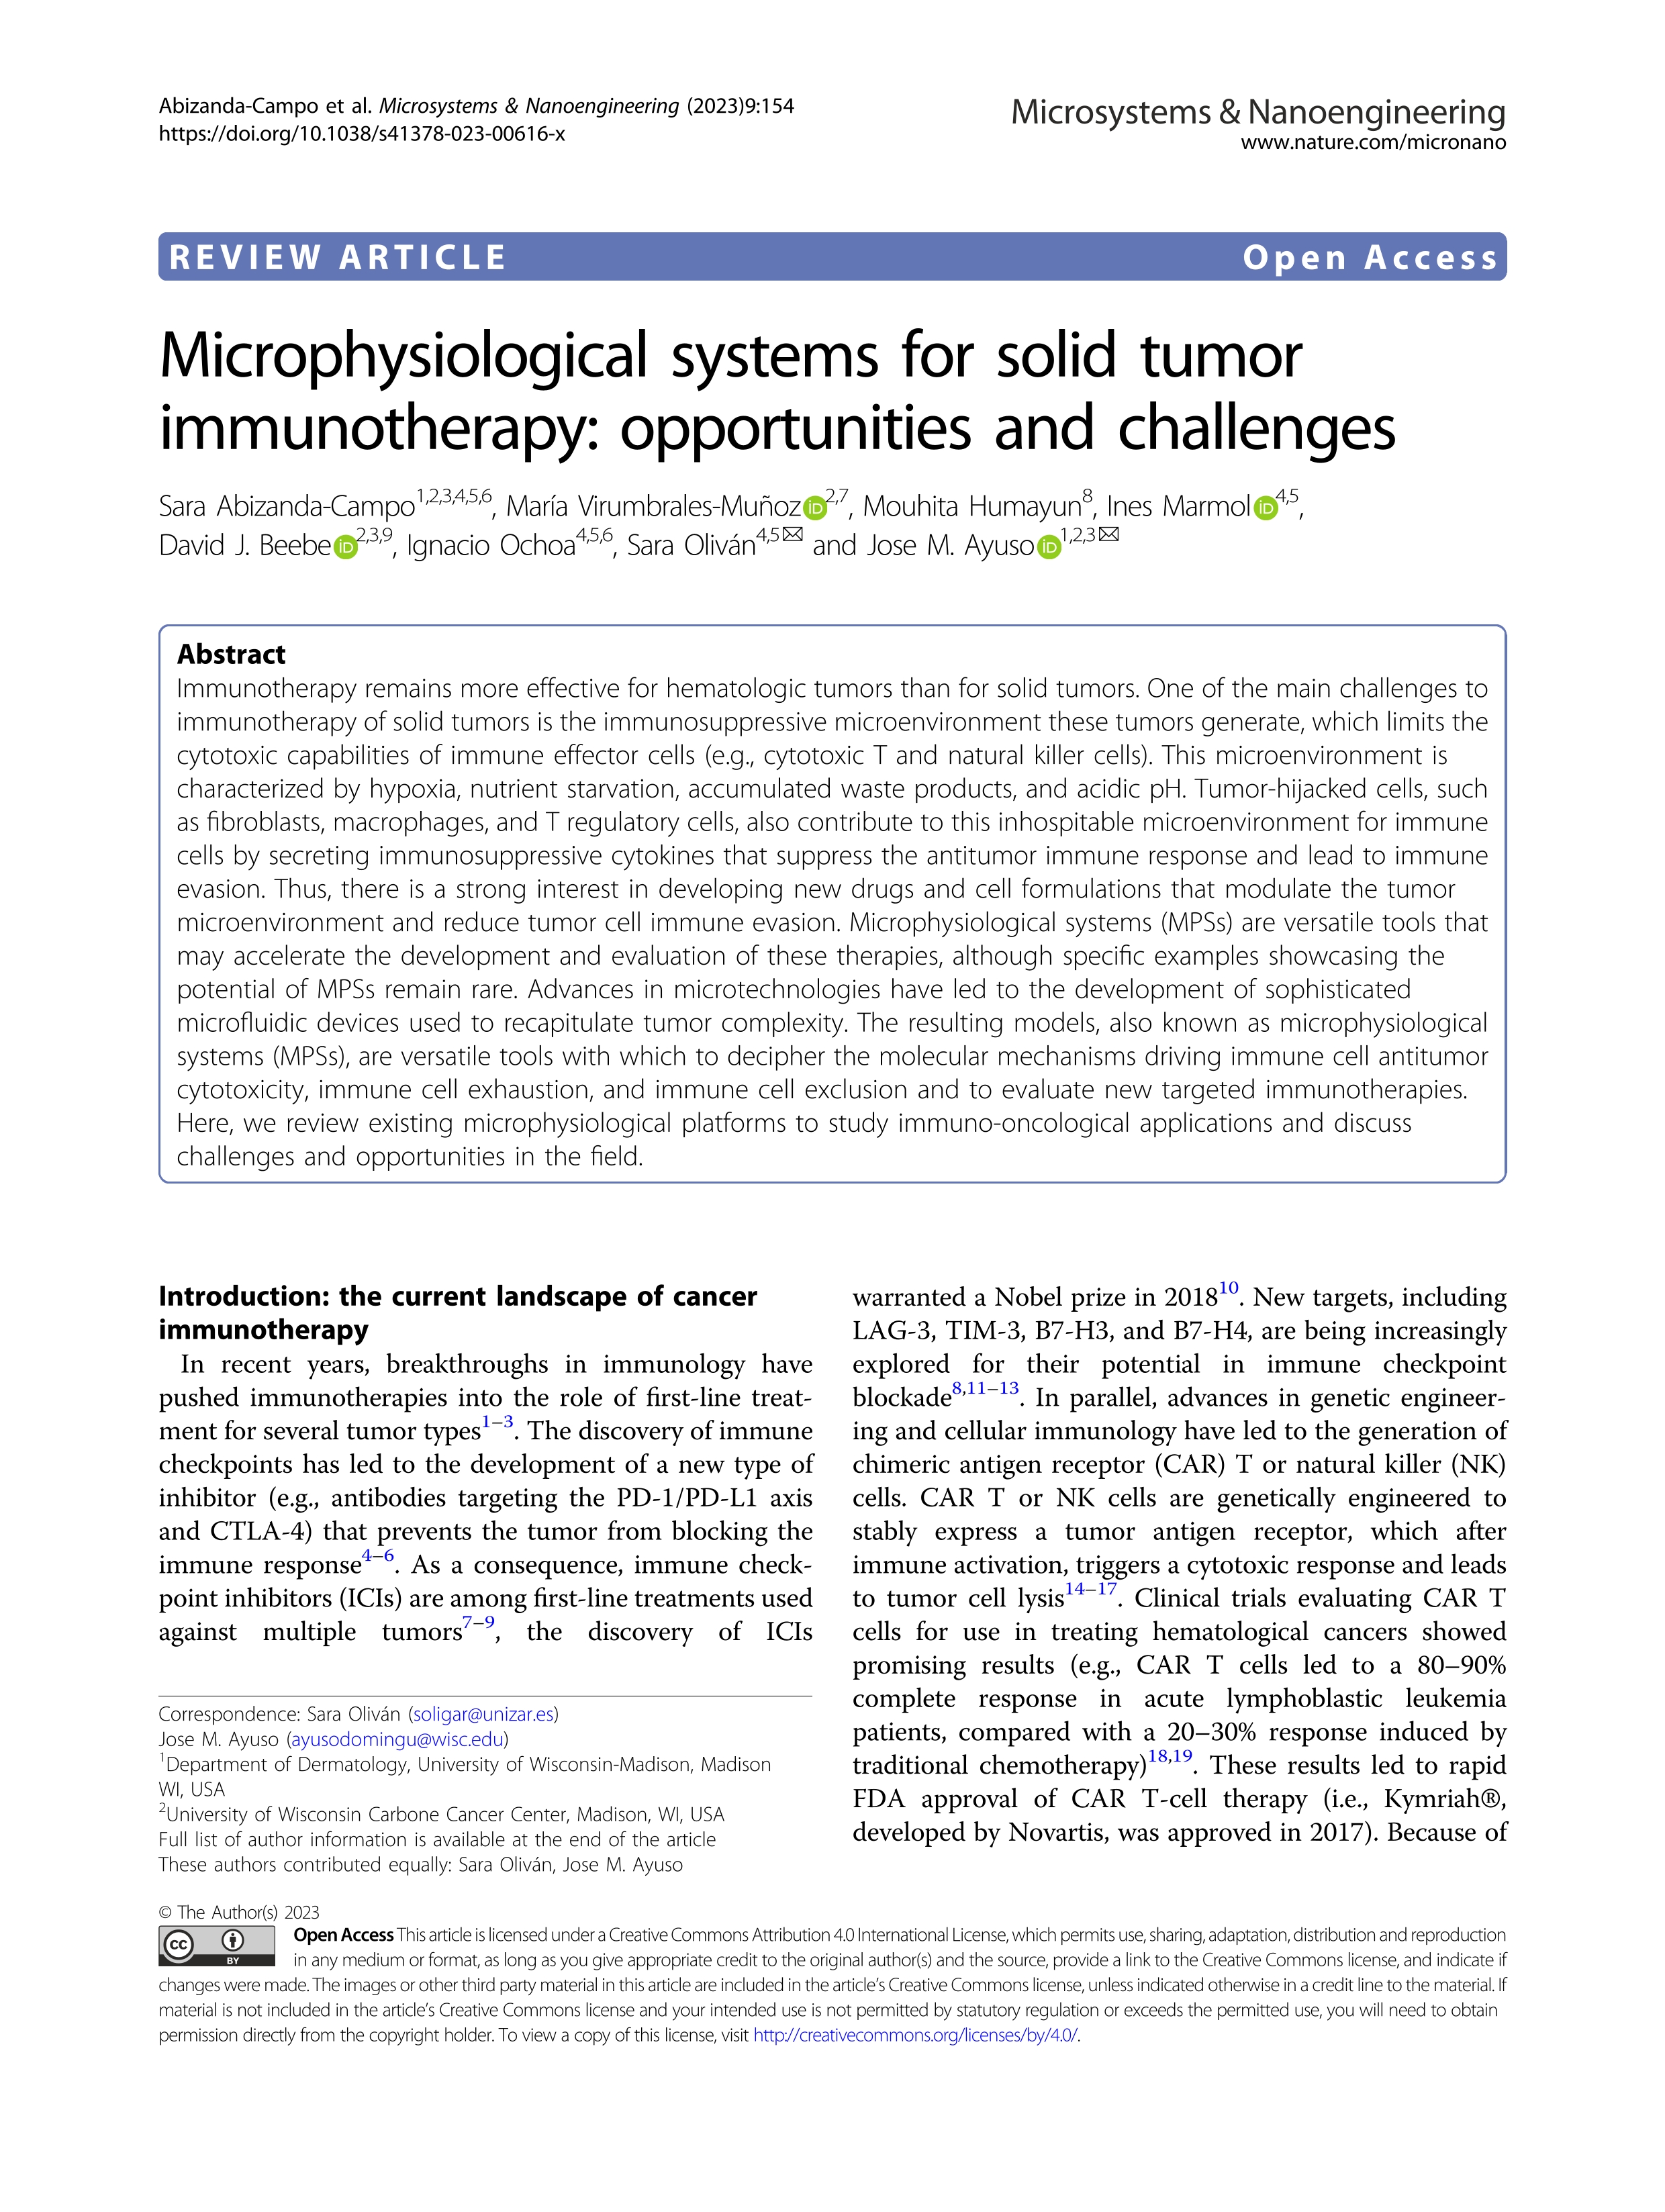 Microphysiological systems for solid tumor immunotherapy: opportunities and challenges